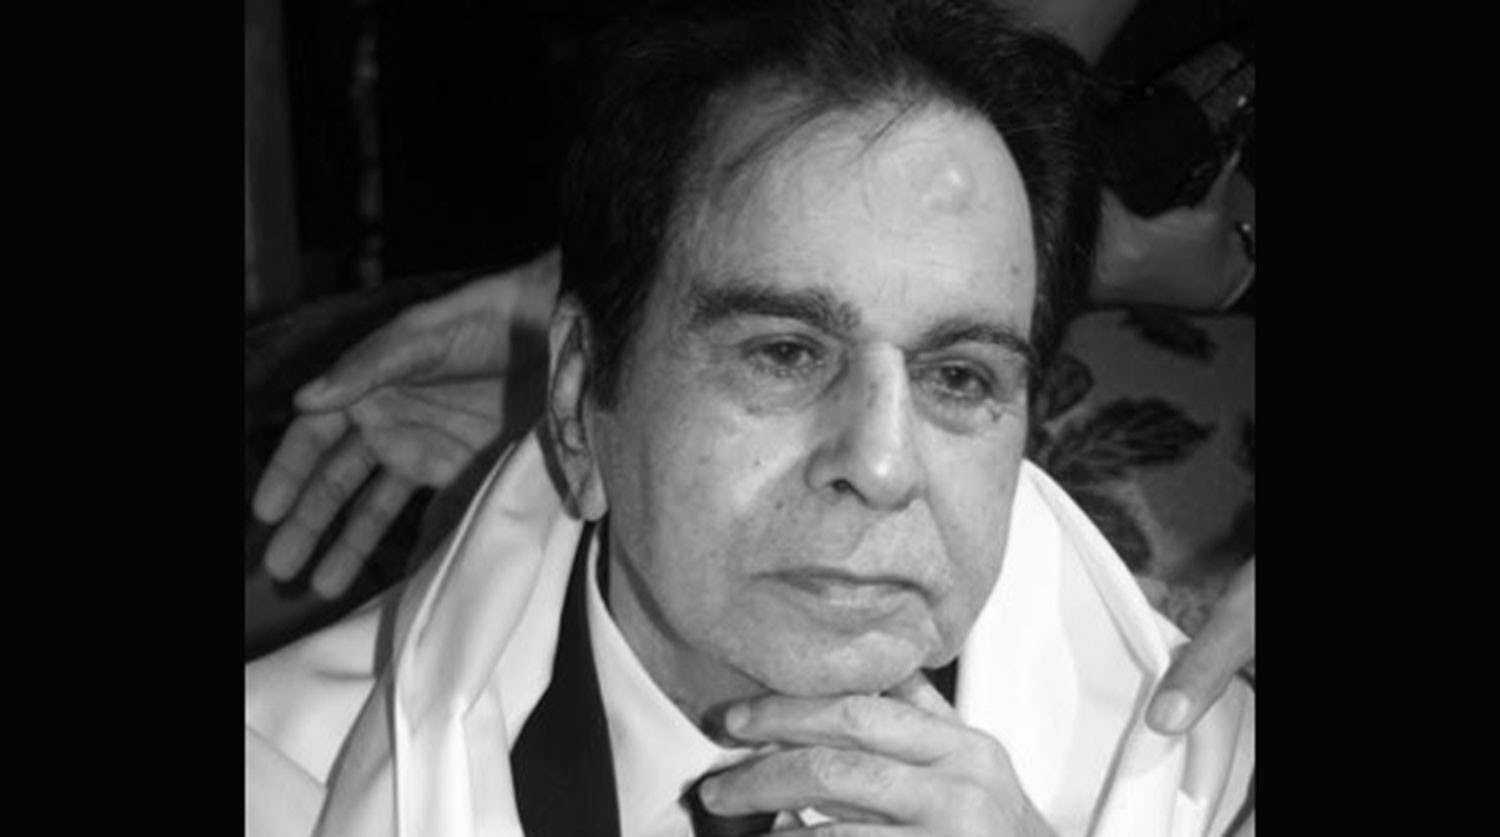 Famous Indian actor Dilip Kumar has died - Daily News